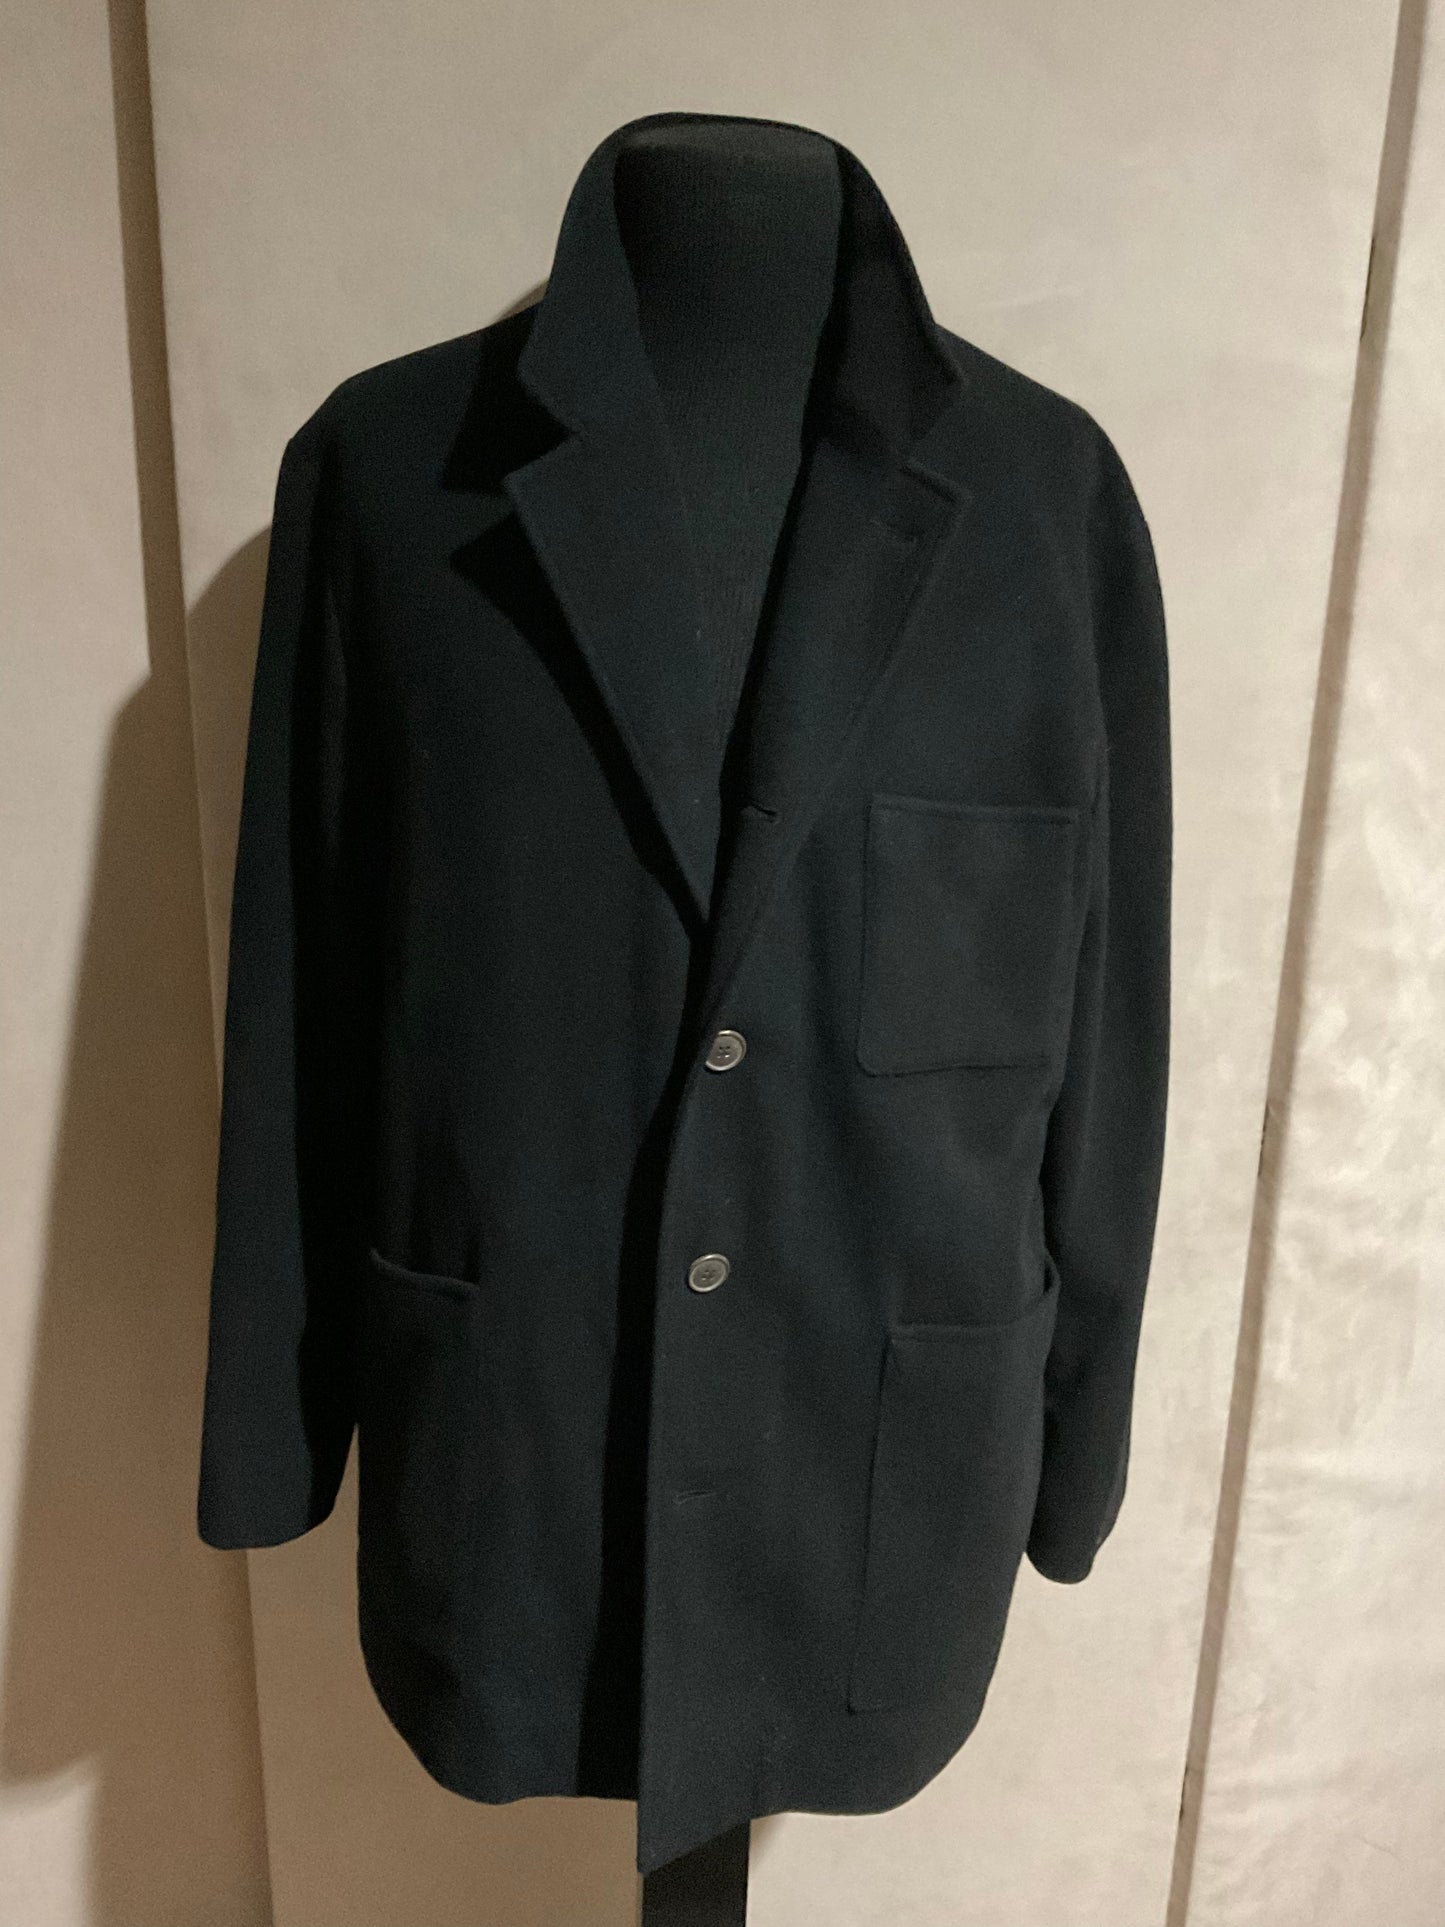 R P JACKET / BLACK WOOL /  LARGE / NEW / UNCONSTRUCTED / MADE IN USA